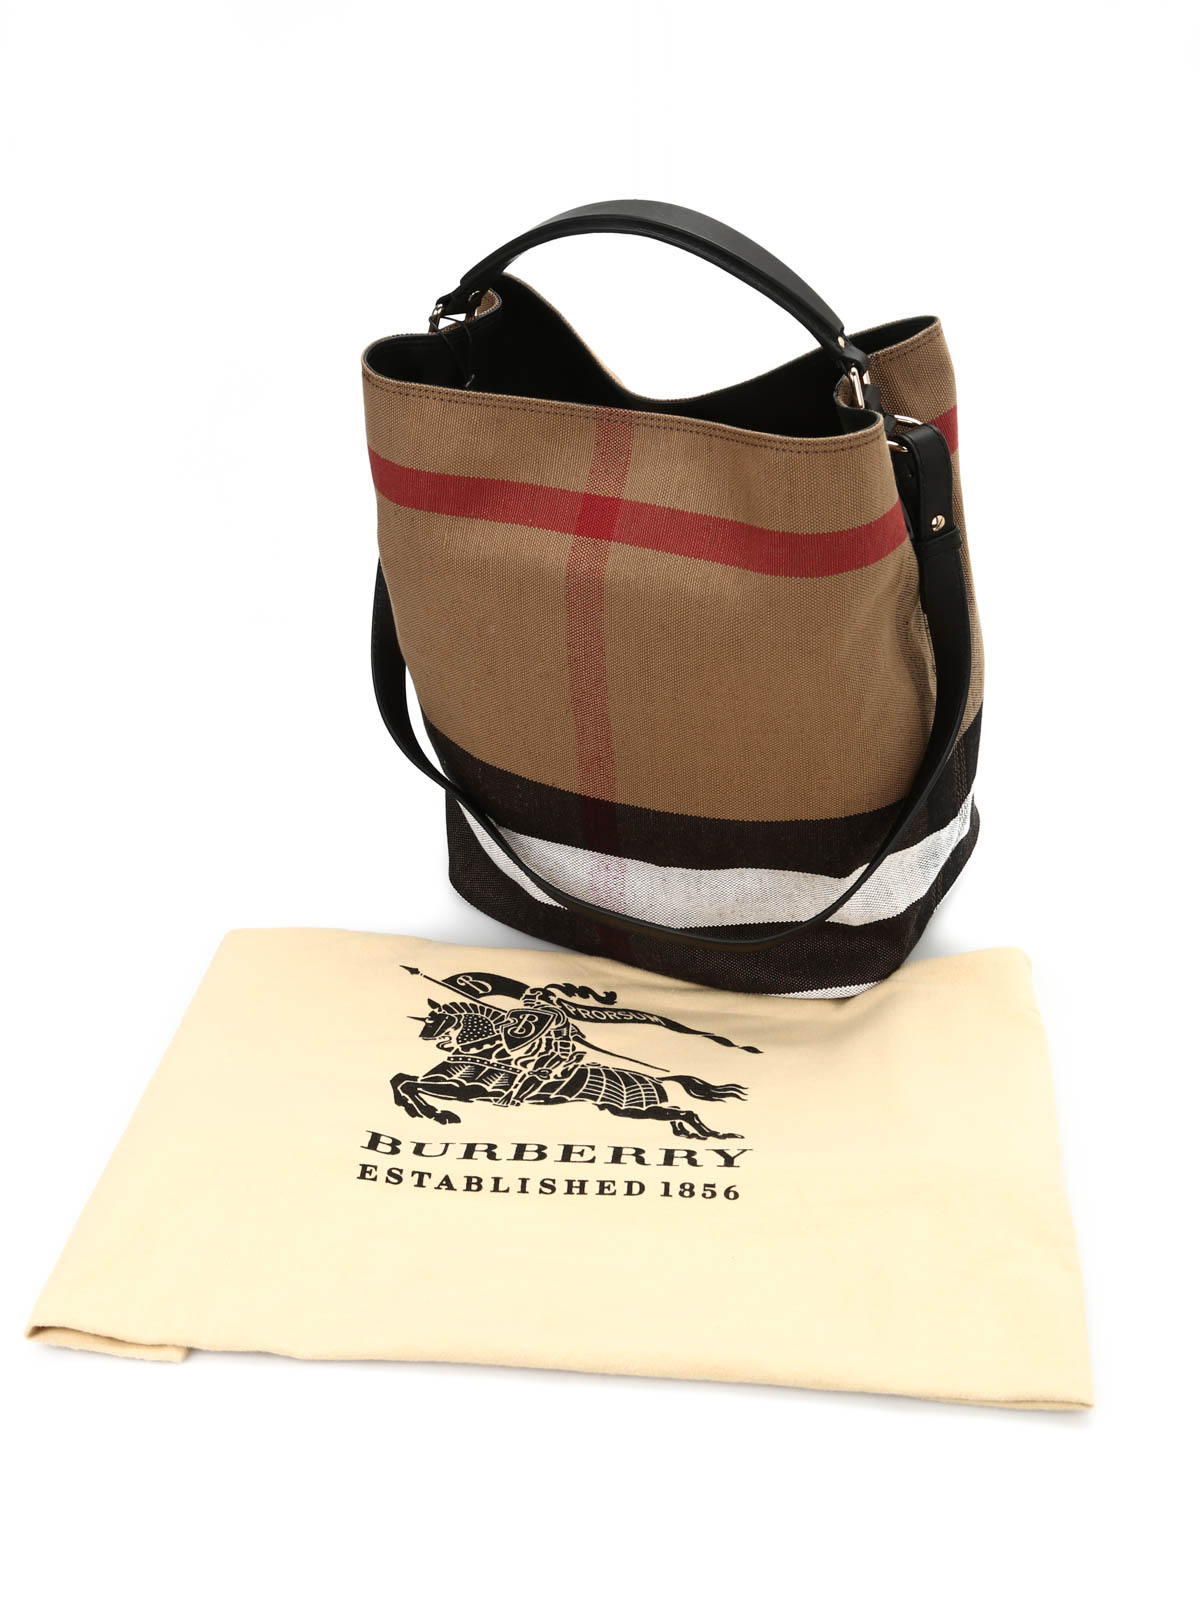 Used Burberry Bags Sale Online - www.puzzlewood.net 1695016208